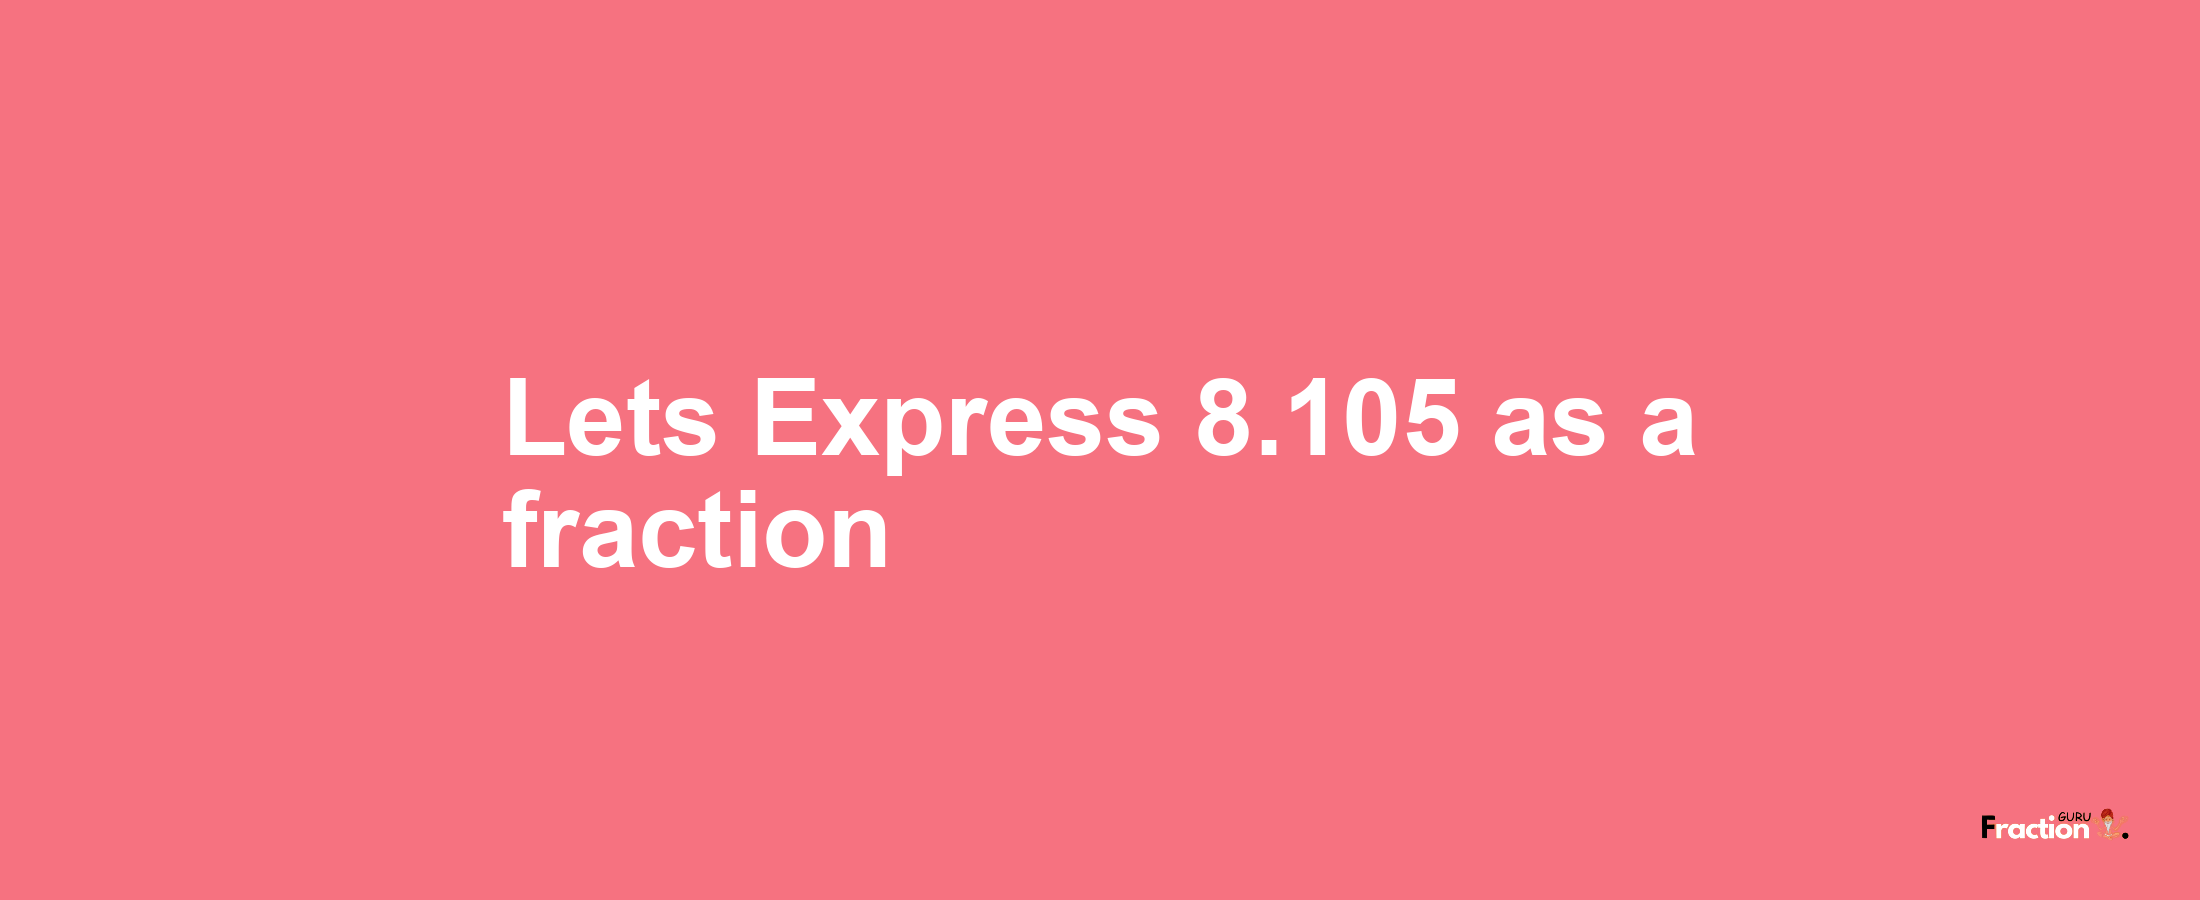 Lets Express 8.105 as afraction